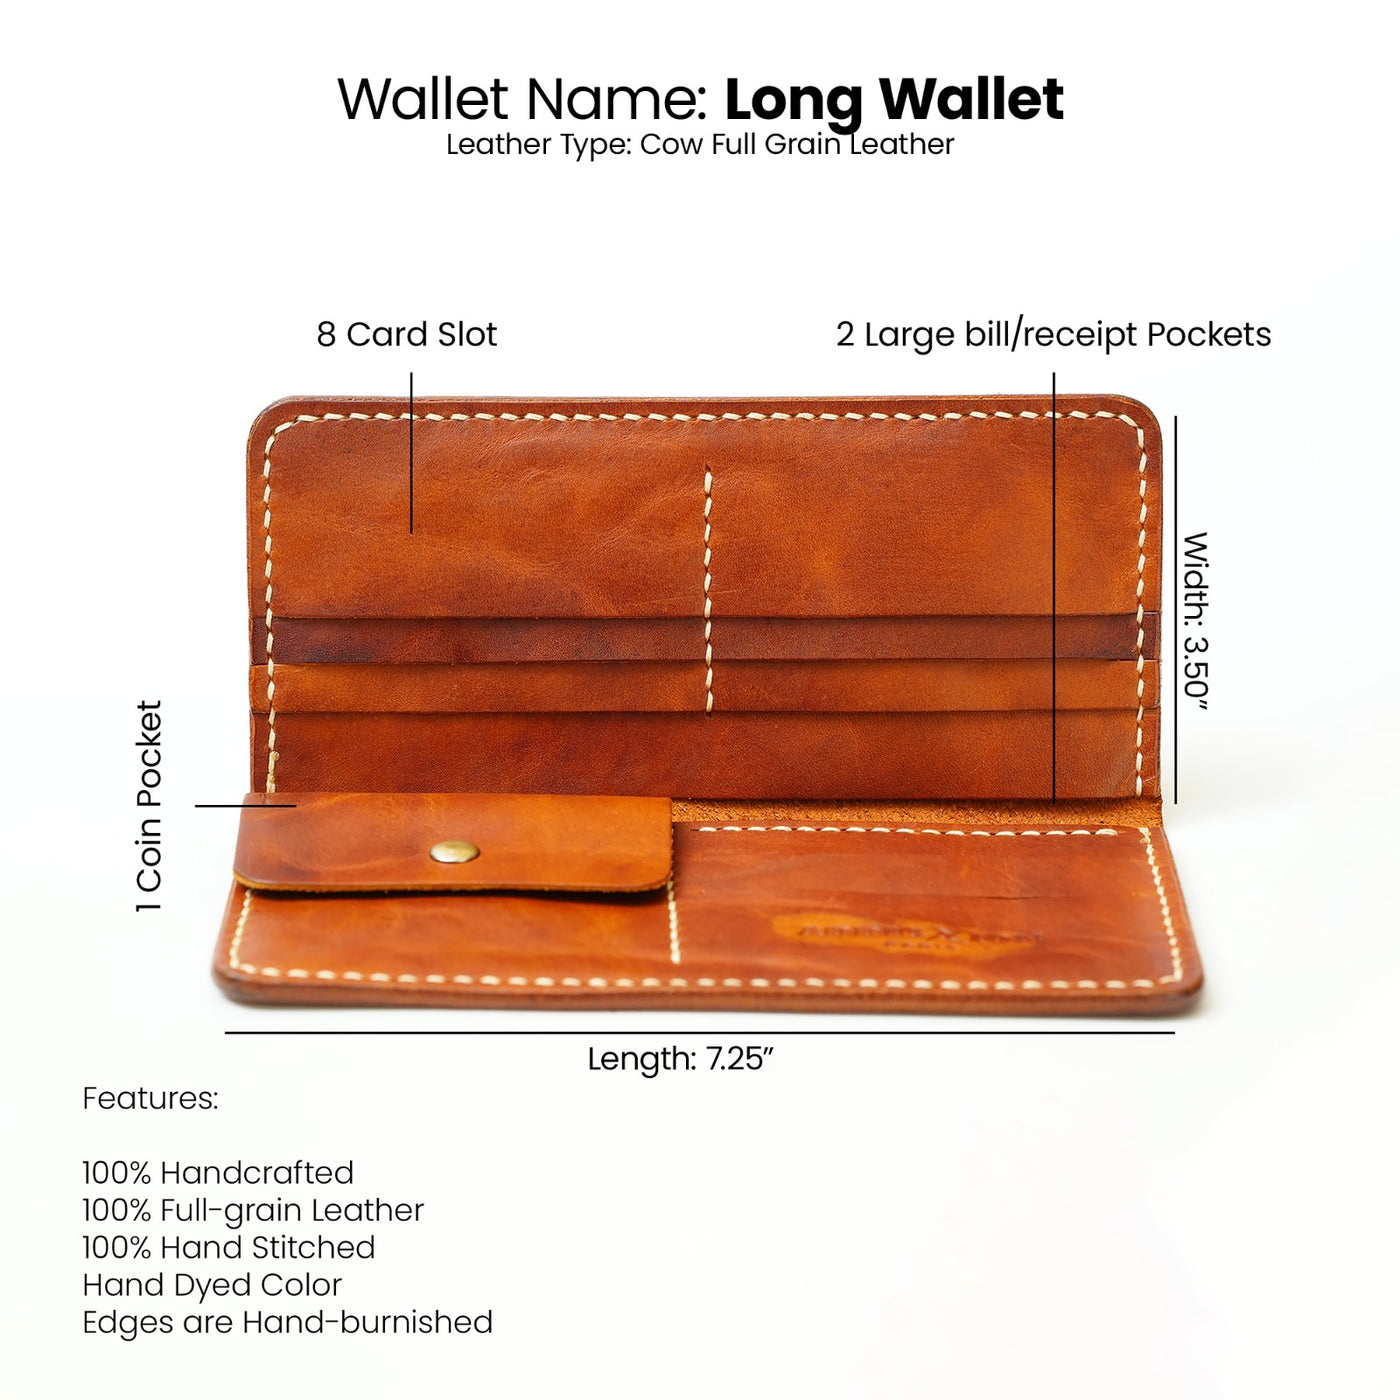 Long Wallet: Hand Dyed Brown